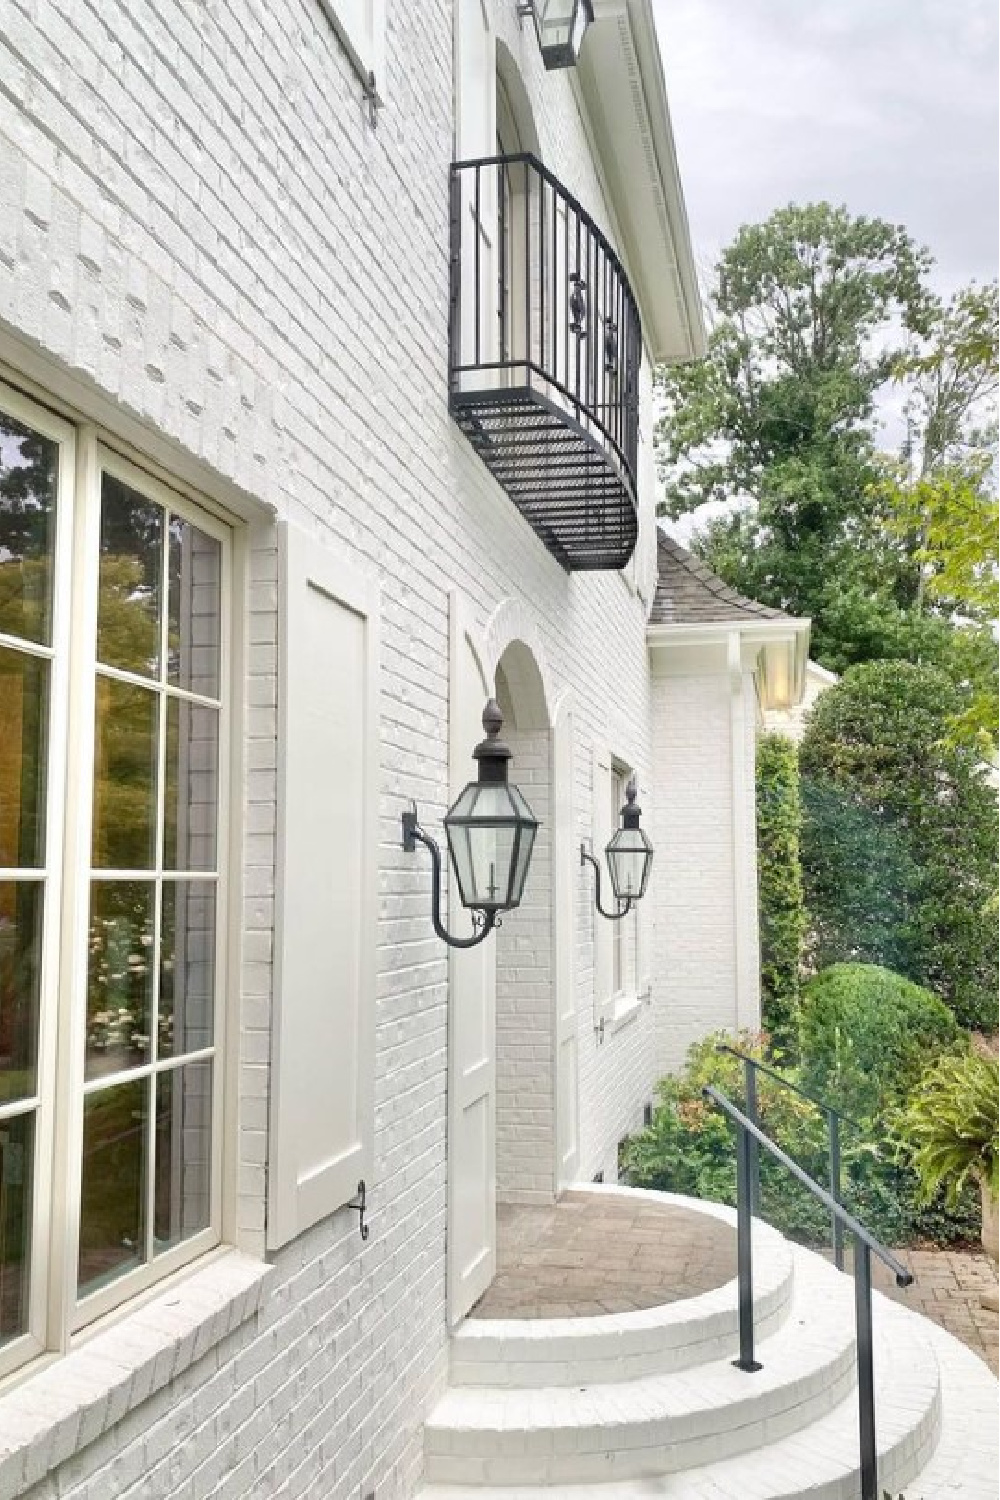 BM White Dove on a gorgeous brick house exterior with arched entry - @dianarosespier. #bmwhitedove